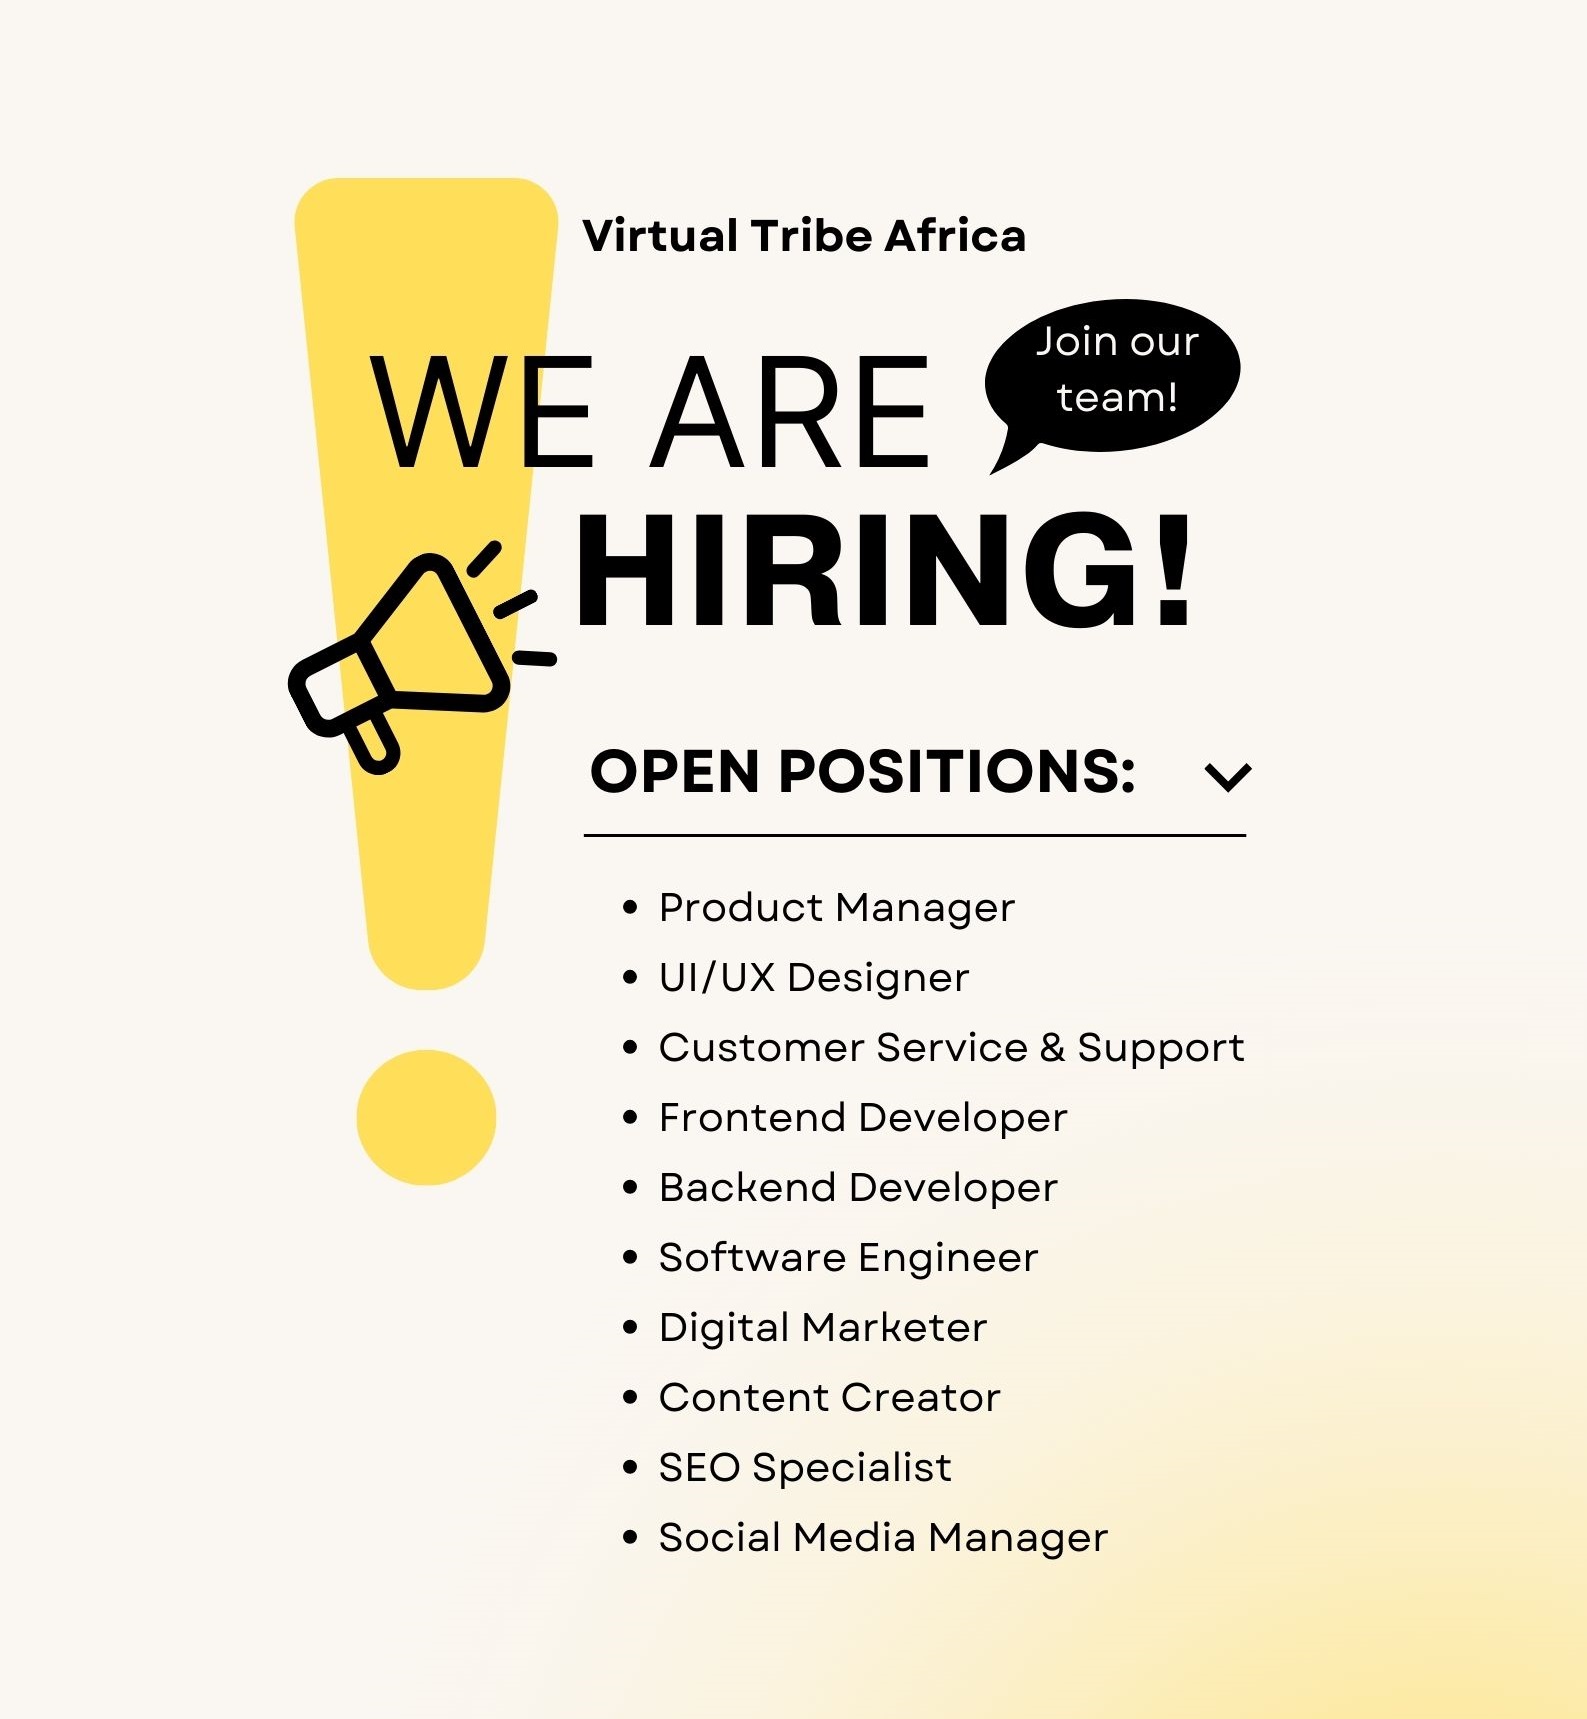 Social Media Manager Needed at Virtual Tribe Africa